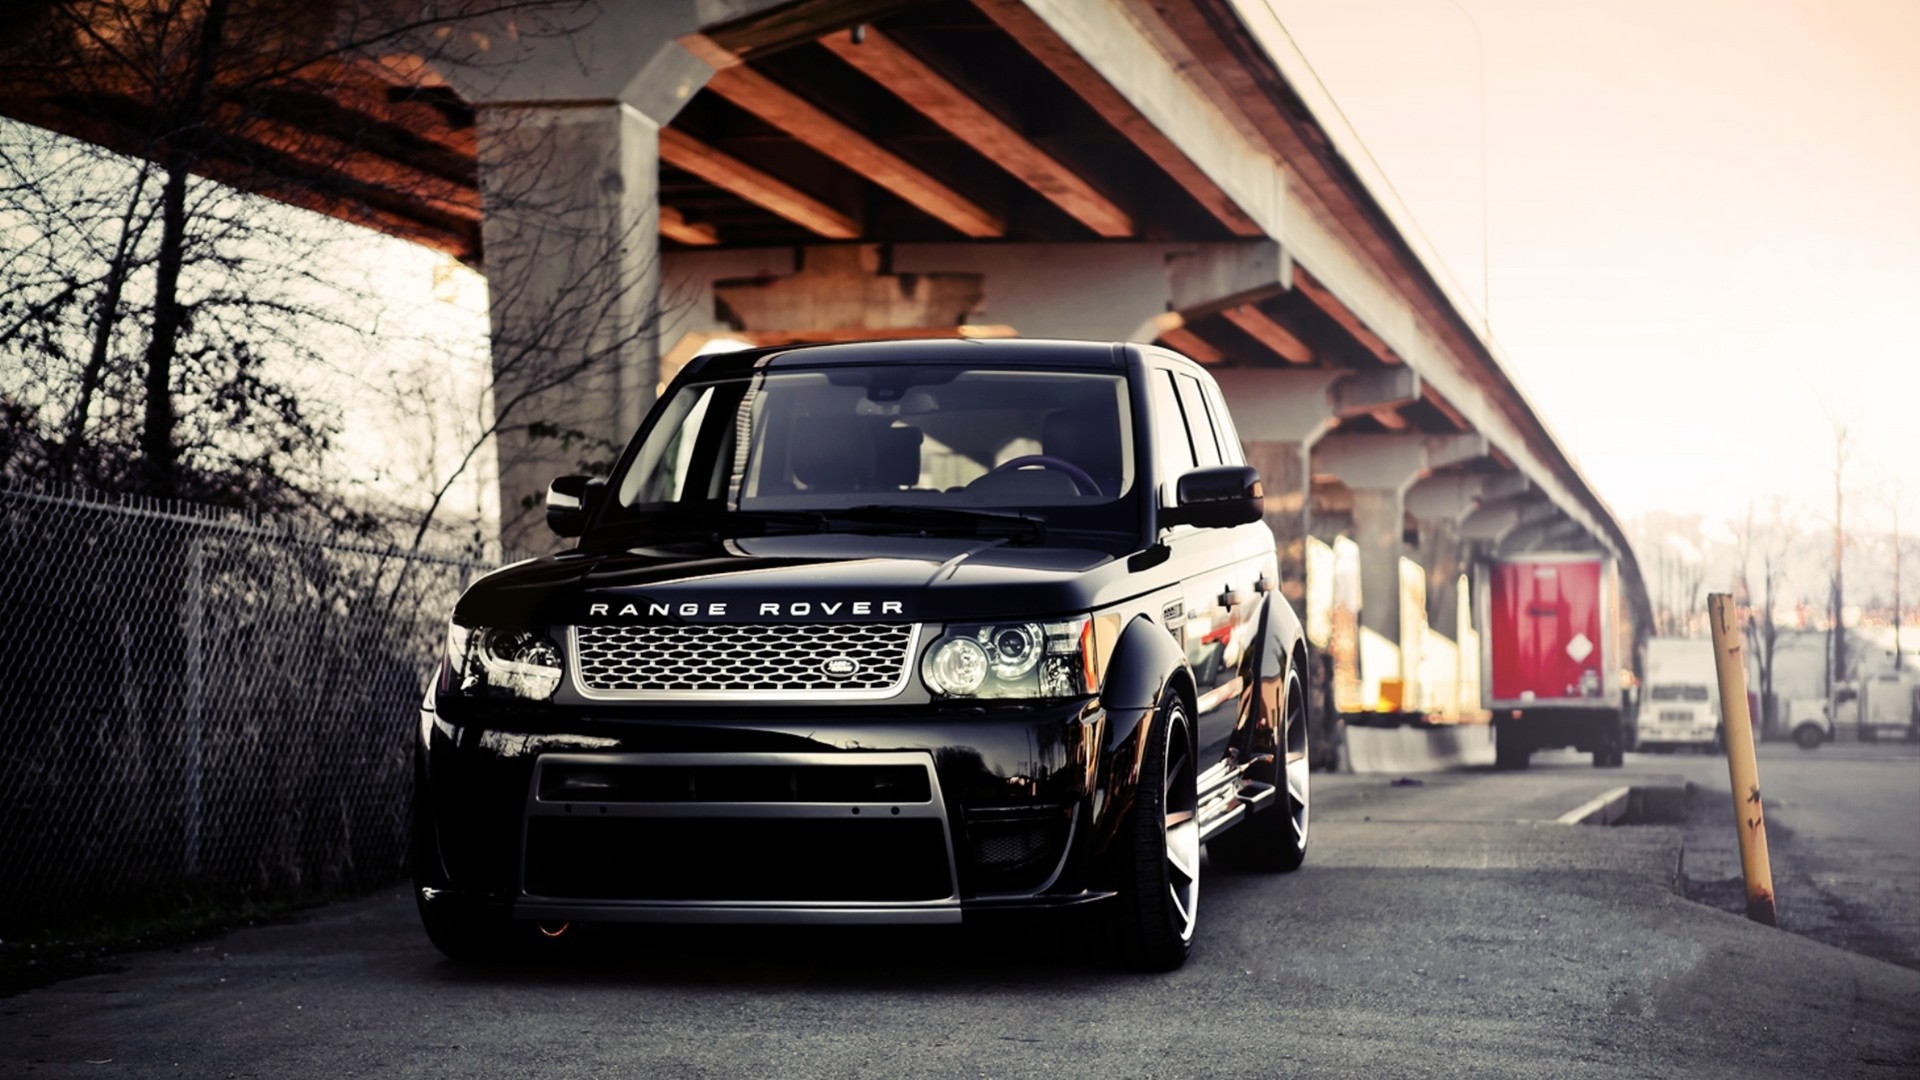 Range Rover Sport Wallpapers HD Full HD Pictures